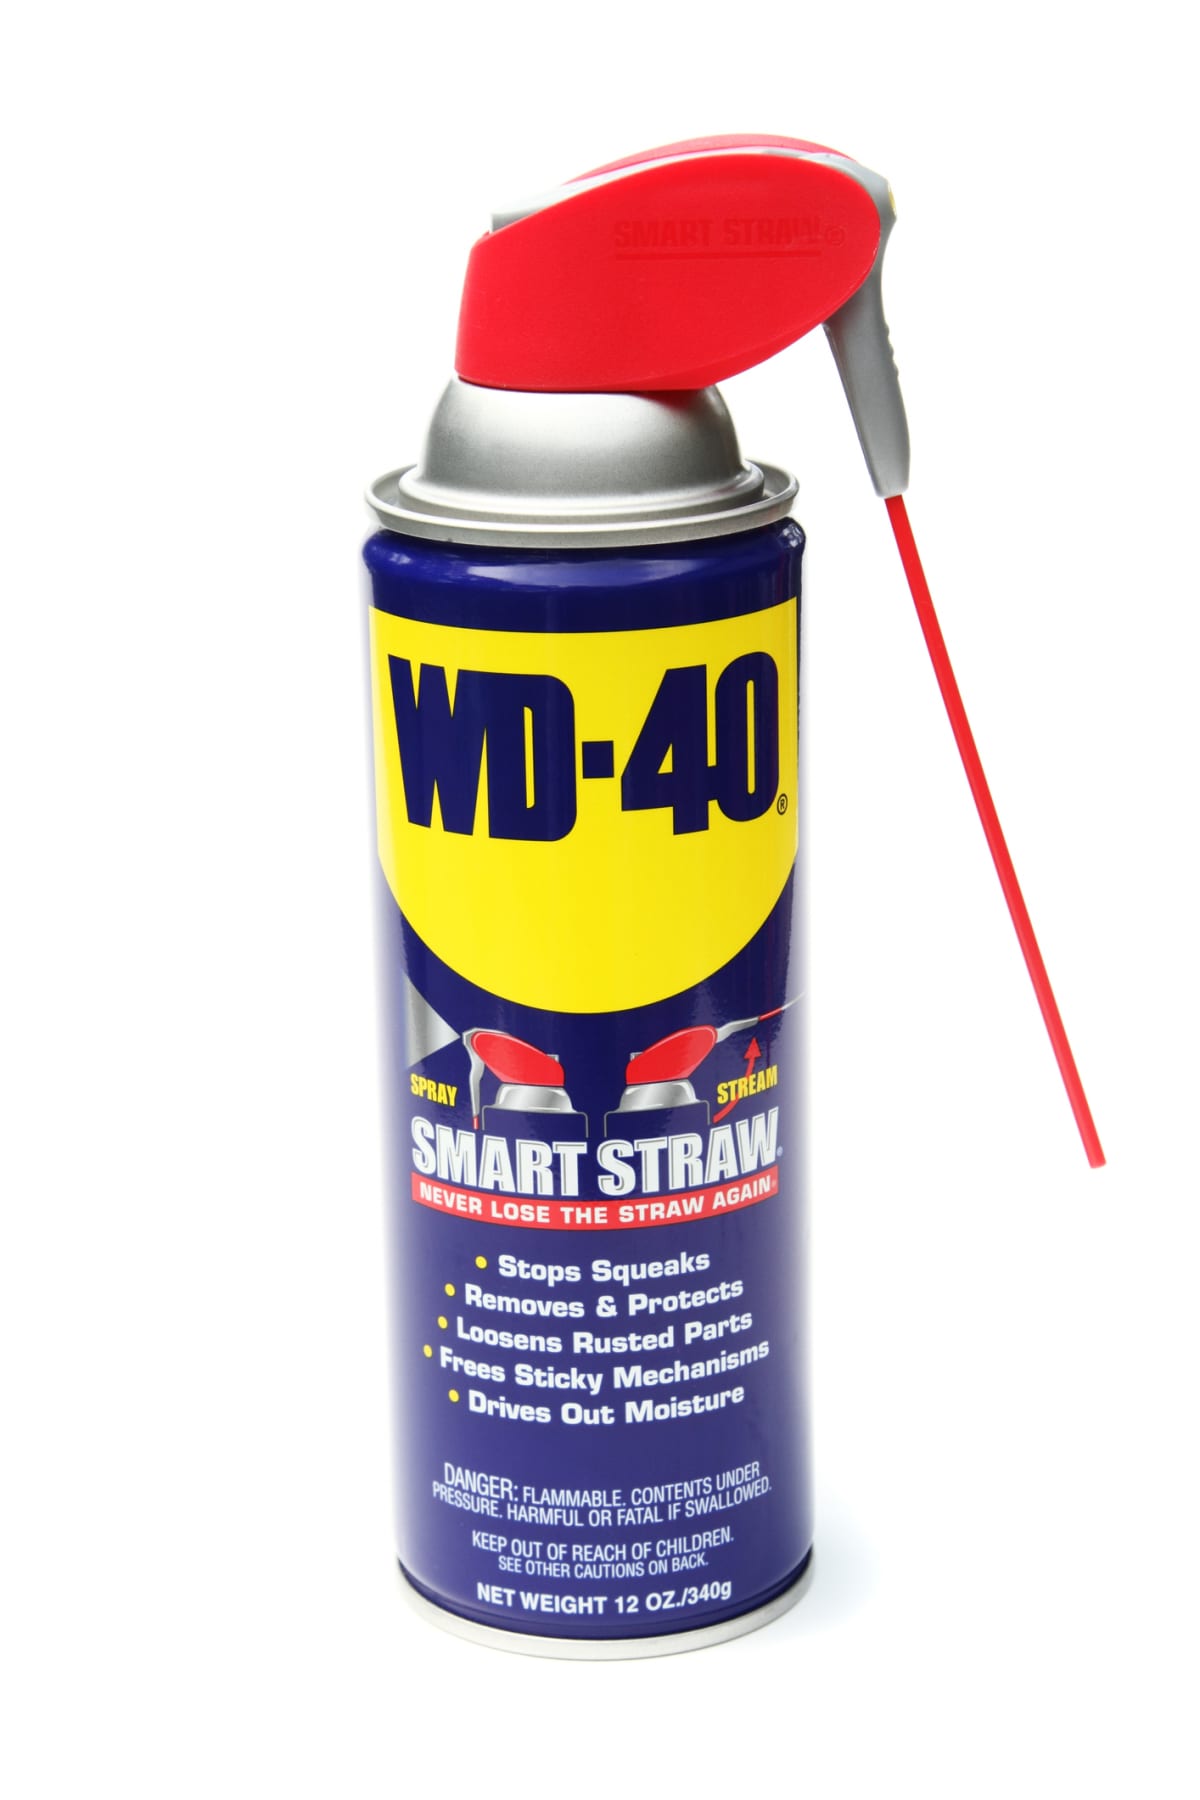 A can of WD-40 against a white background